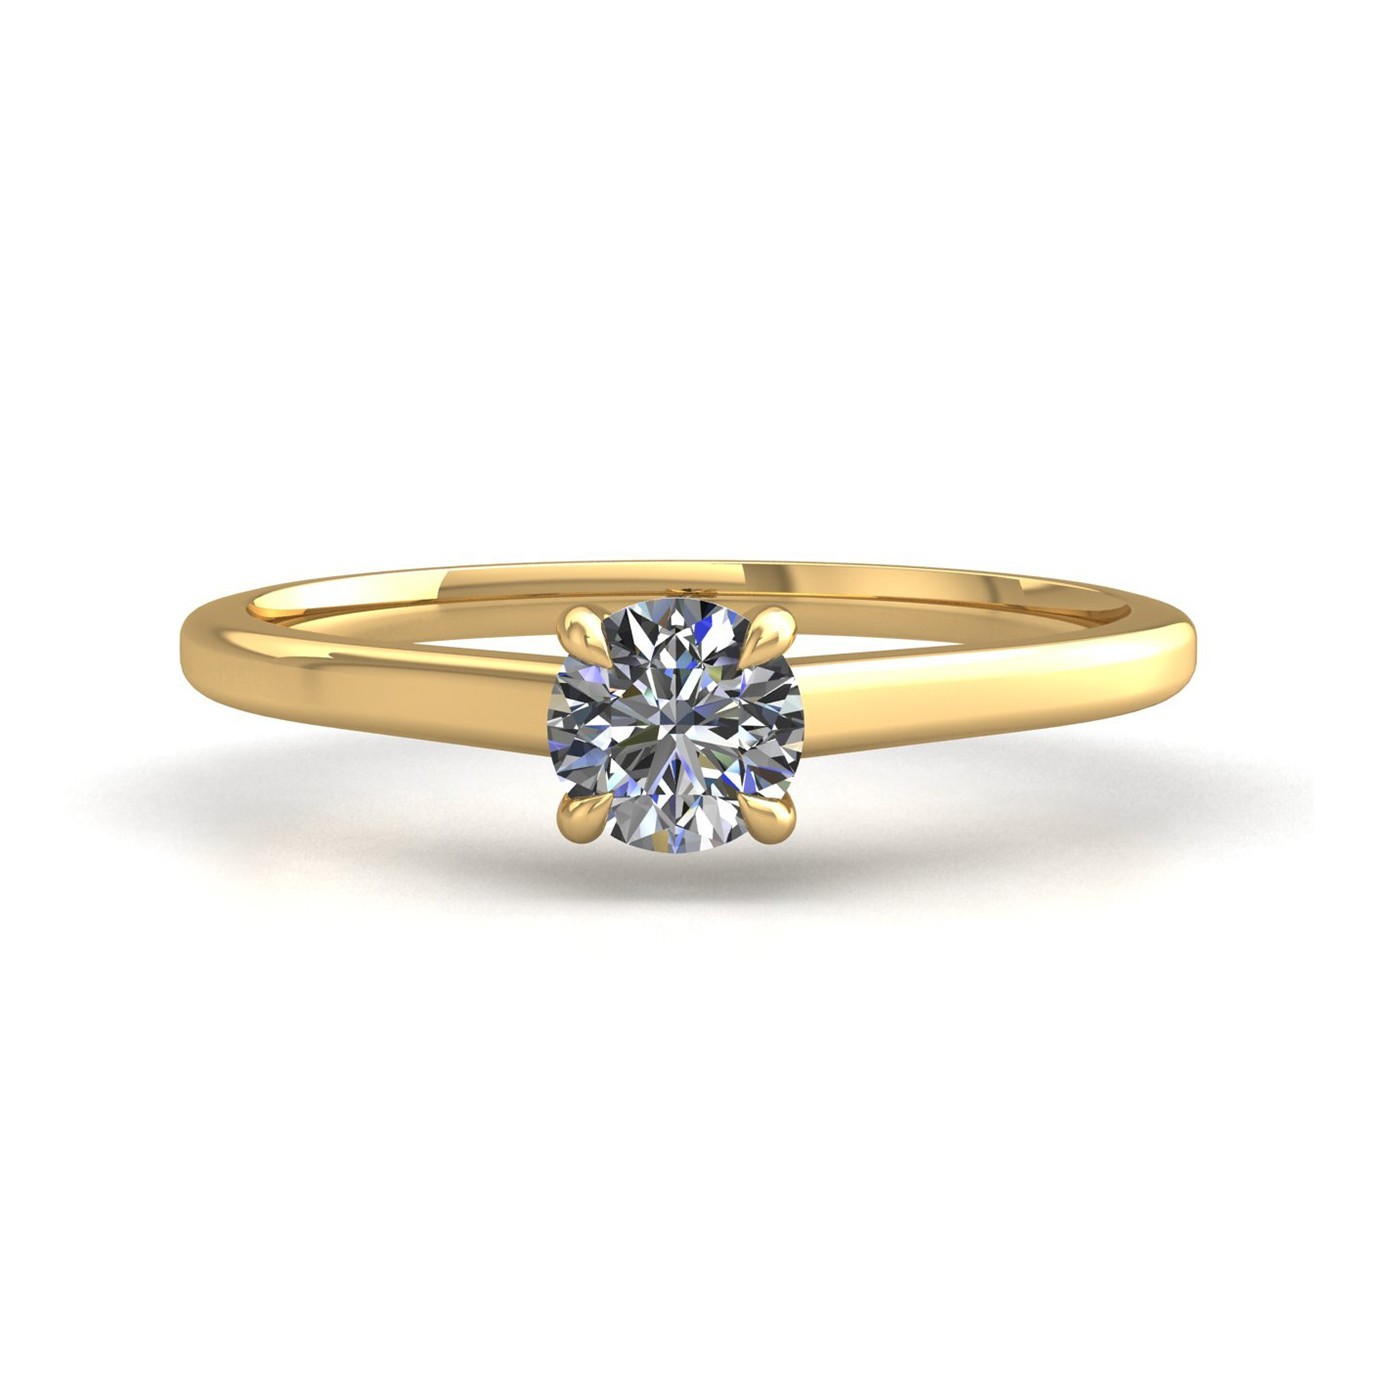 18k yellow gold 0,50 ct 4 prongs solitaire round cut diamond engagement ring with whisper thin band Photos & images